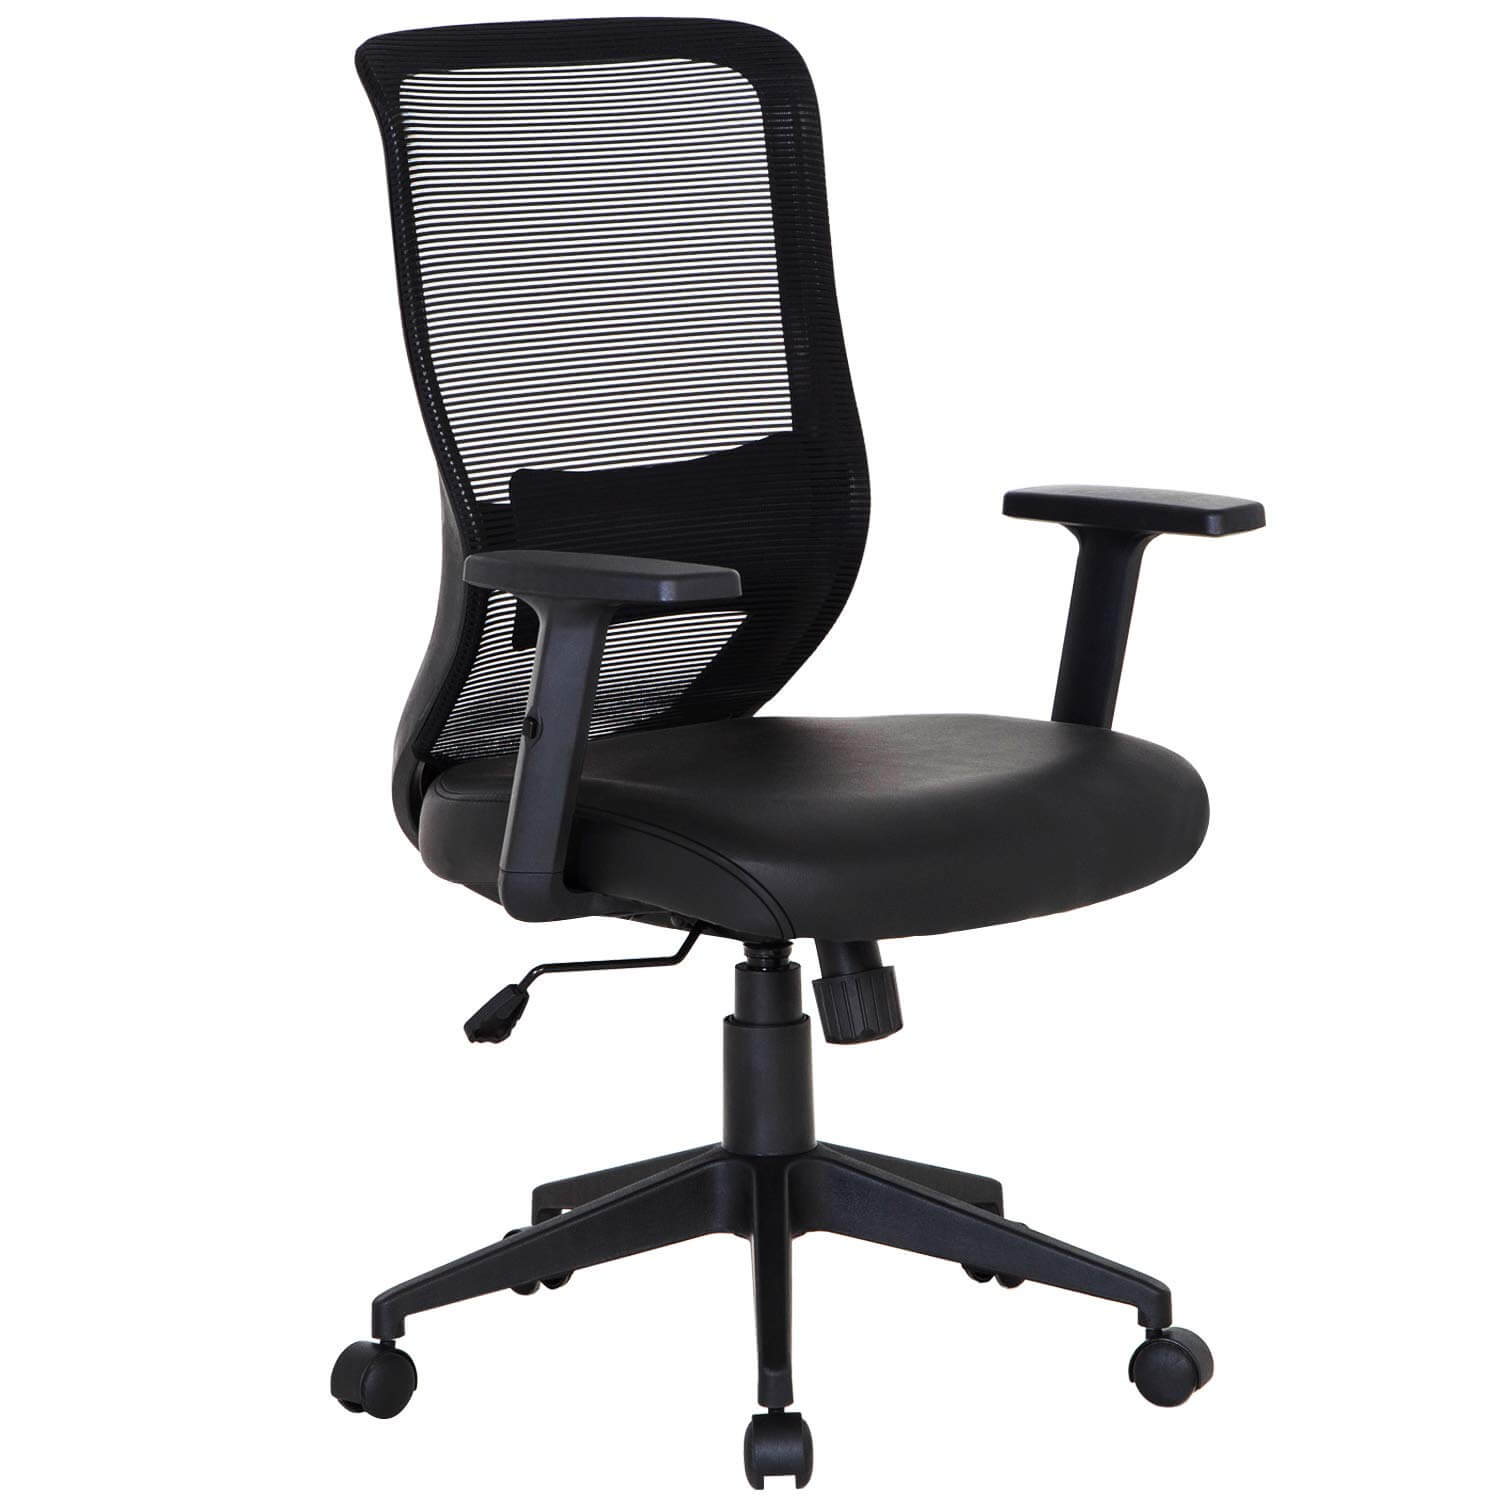 The Best Desk Chair Chair Executive Office Desk Comfy Good Look Leather ...